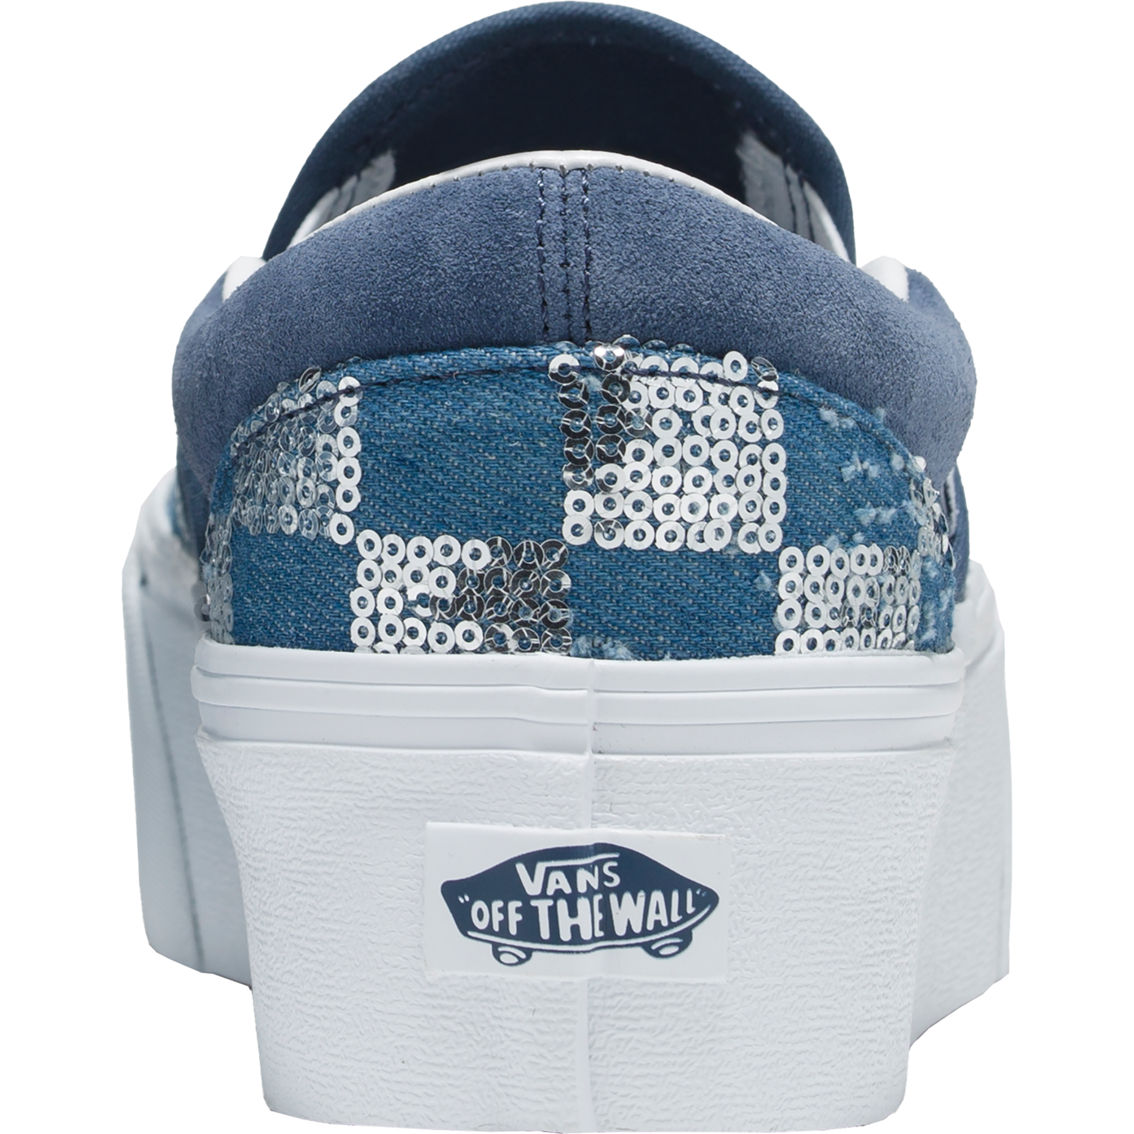 Vans Classic Slip On Stackform Glimmer Check Shoes - Image 4 of 4